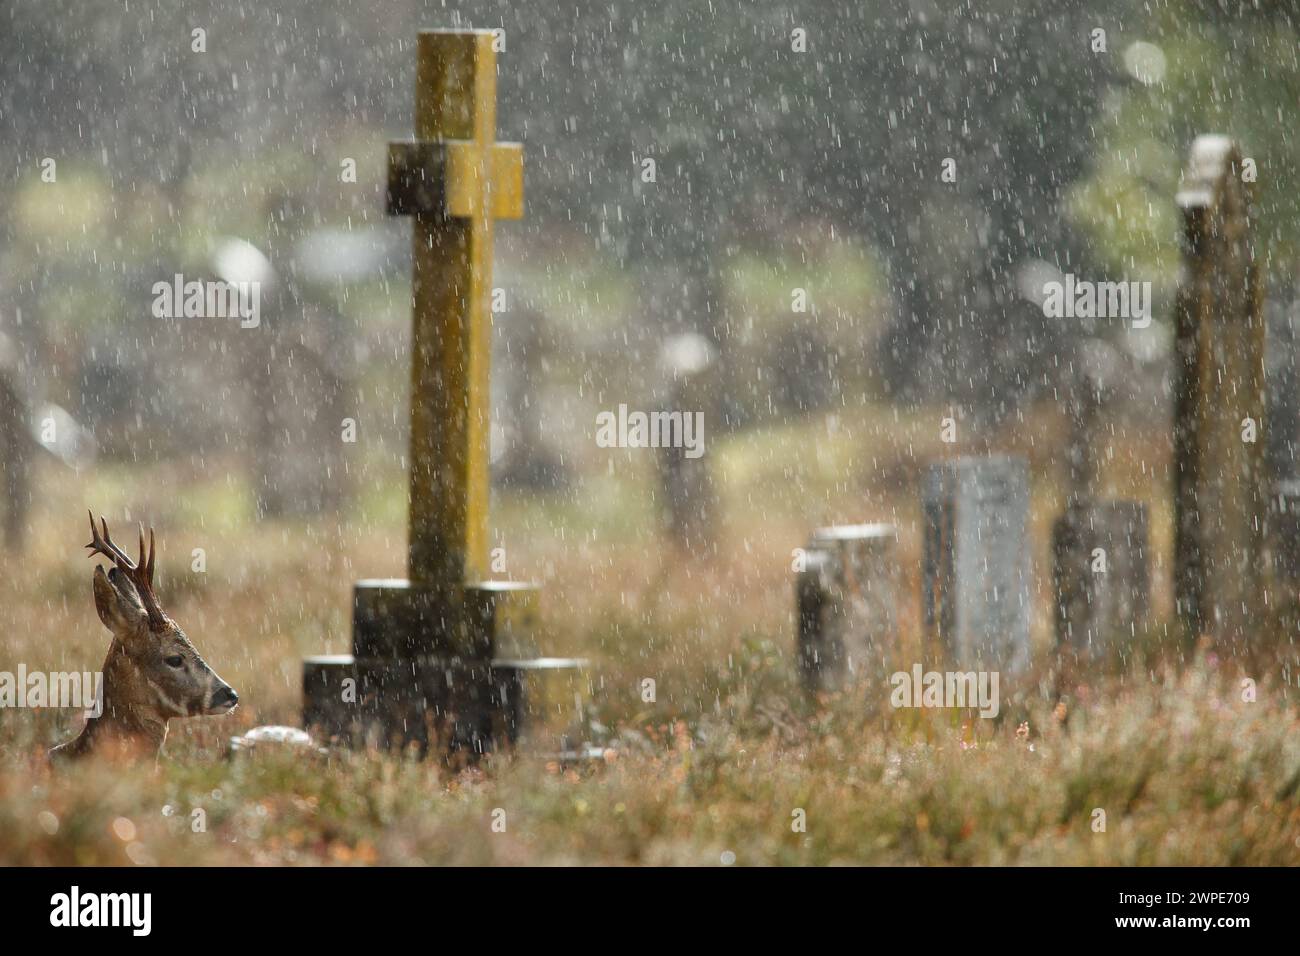 Roe buck resting in a cemetery during a heavy downpour Stock Photo